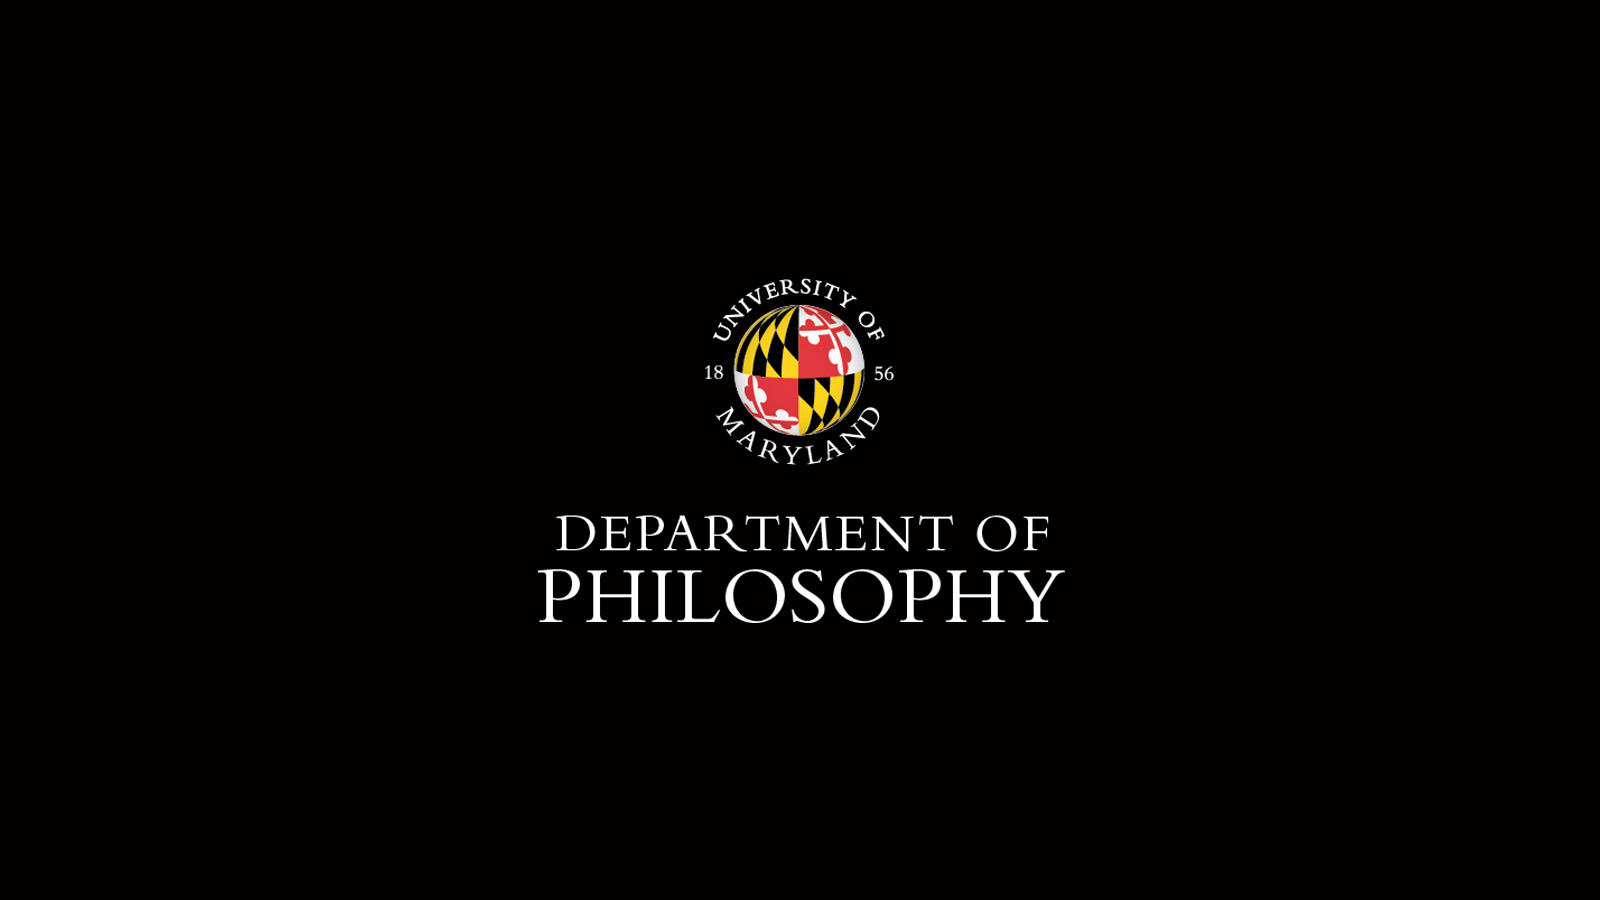 Department of Philosophy logo in white letters on a black background